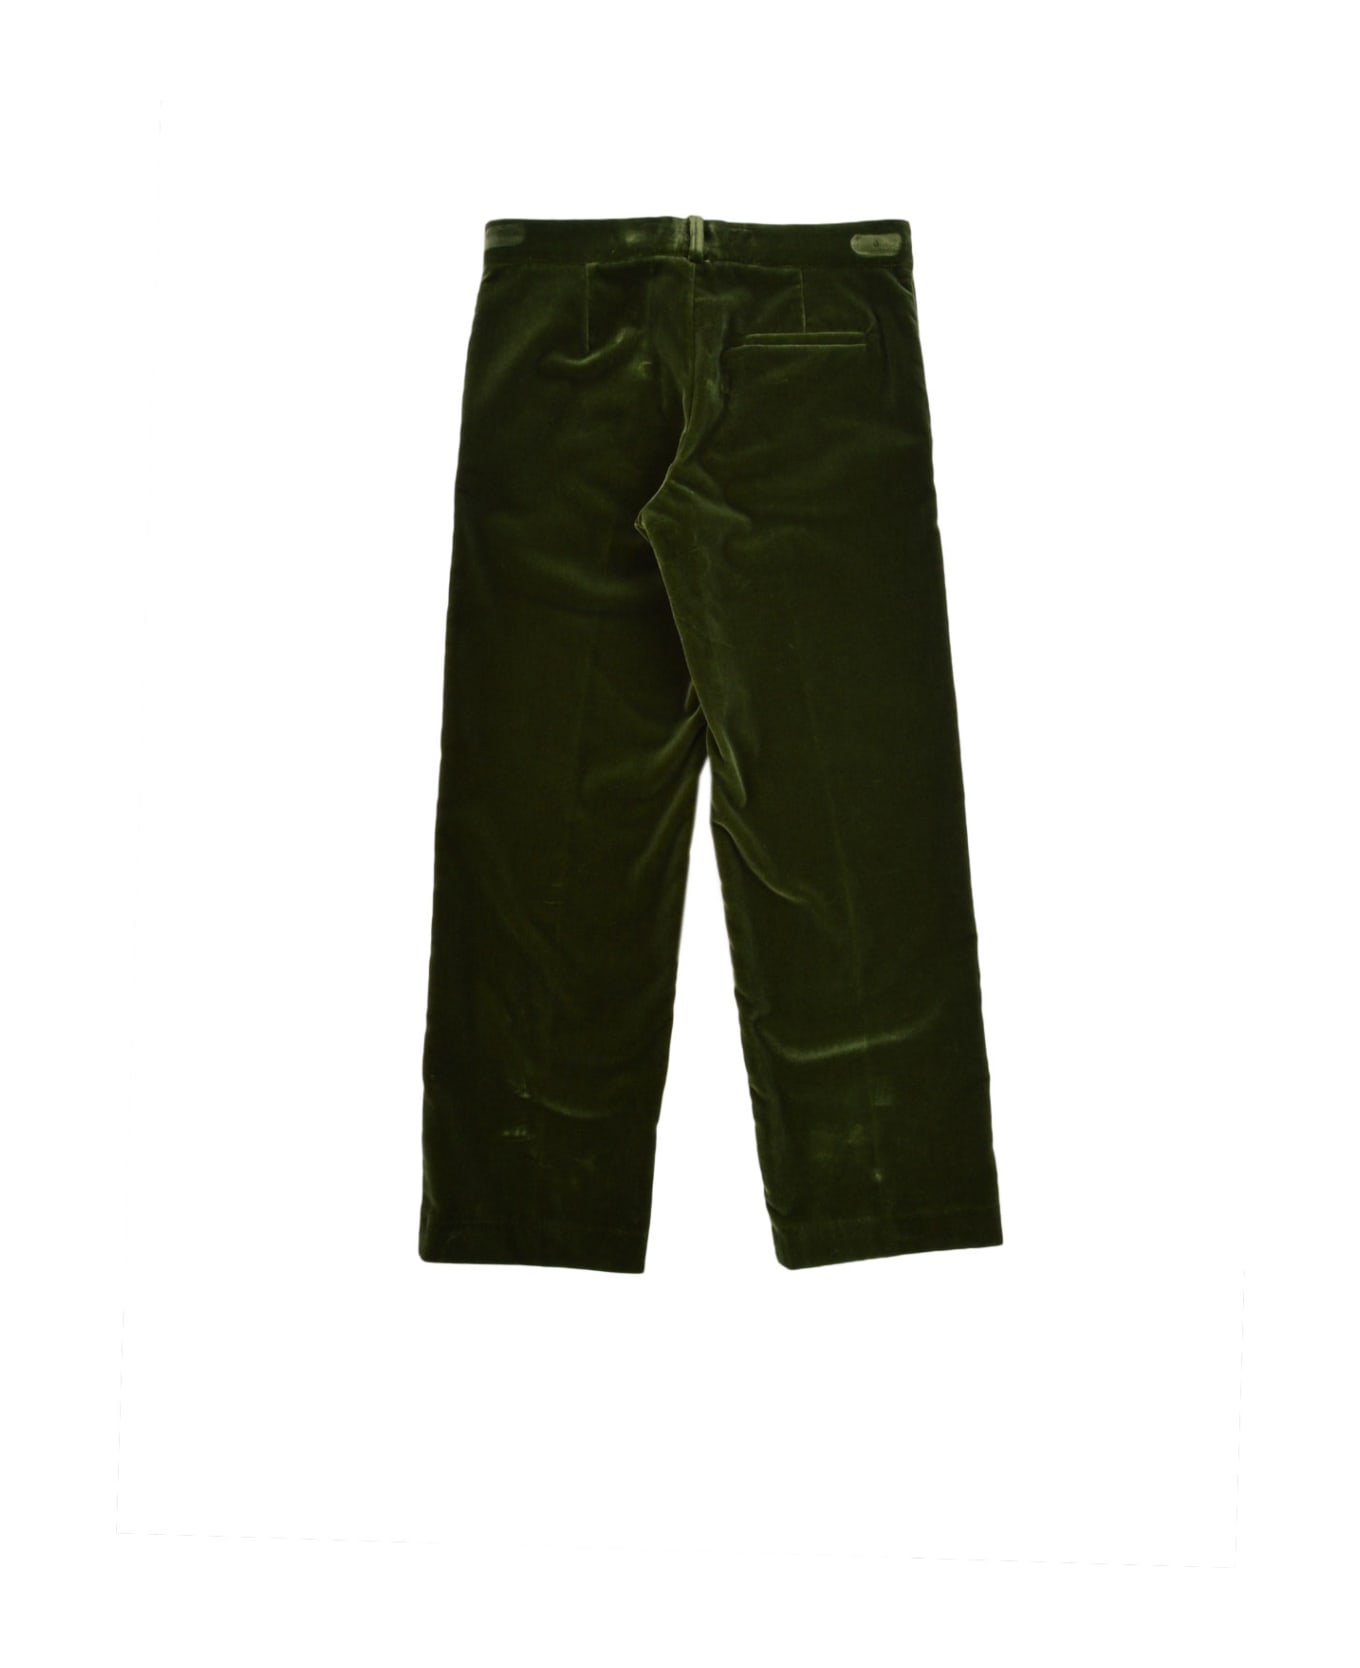 Gucci Cotton Velvet Trousers - Green ボトムス